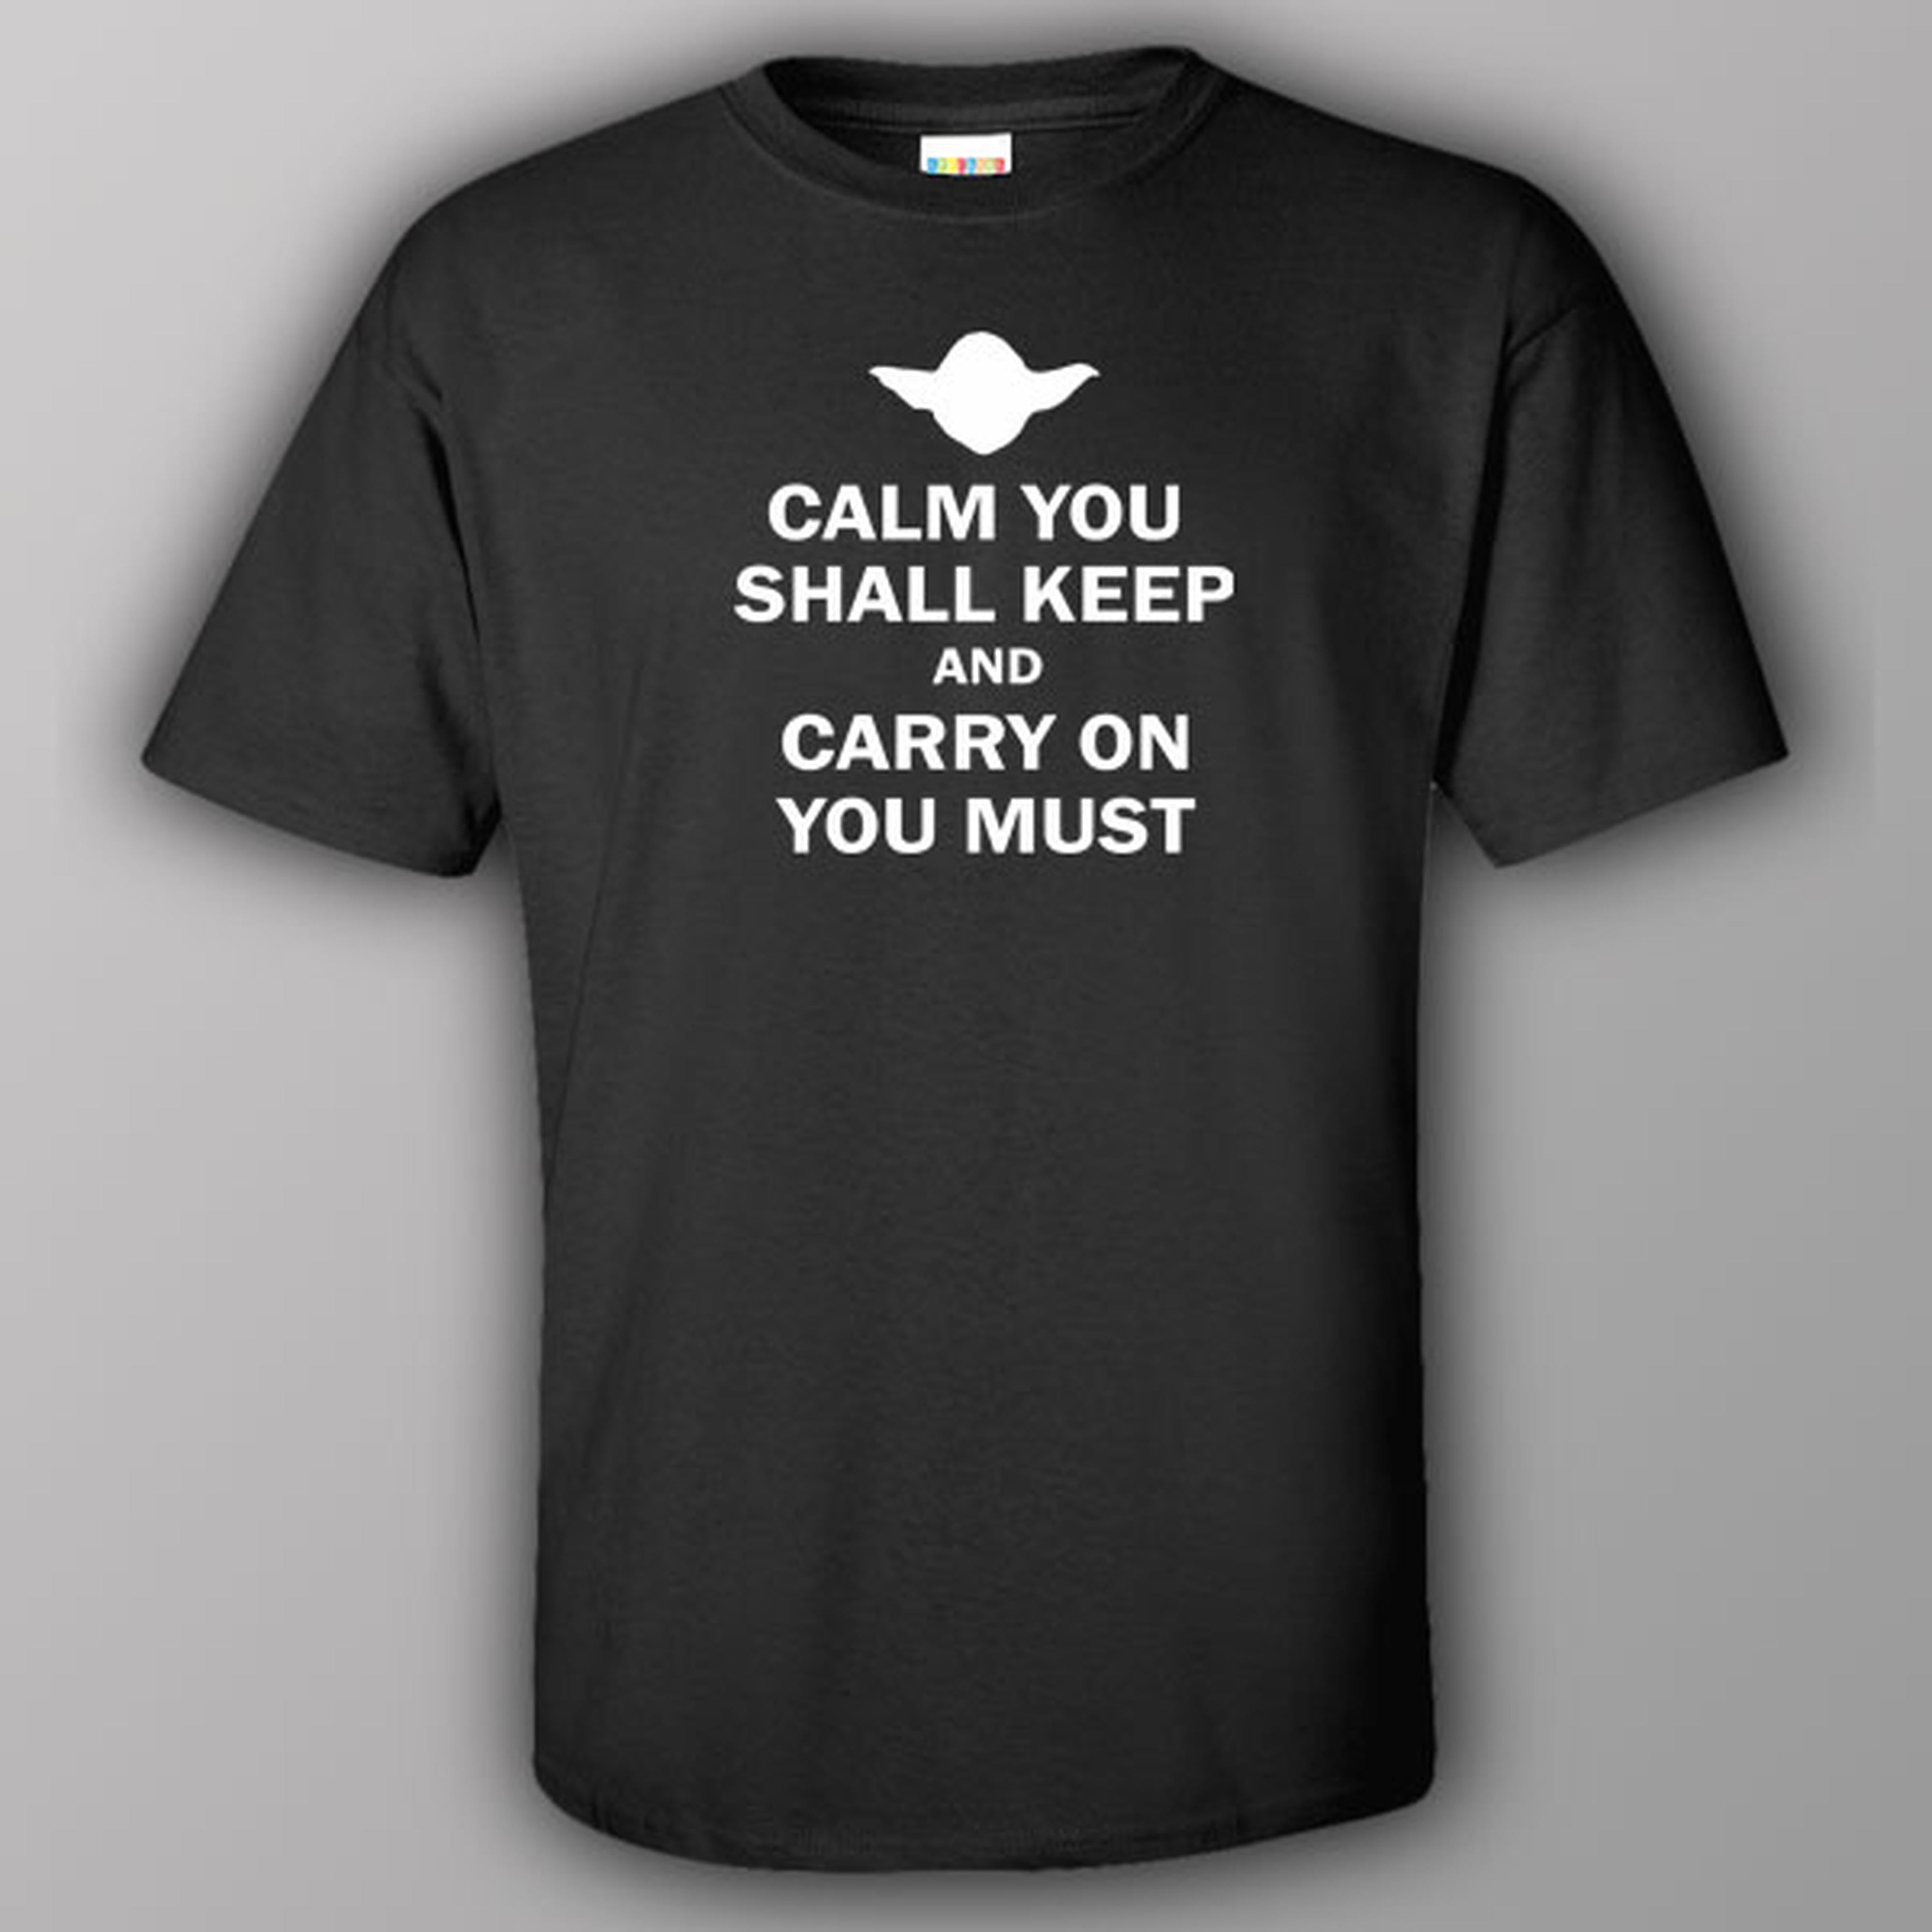 Calm you shall keep and carry on you must - T-shirt